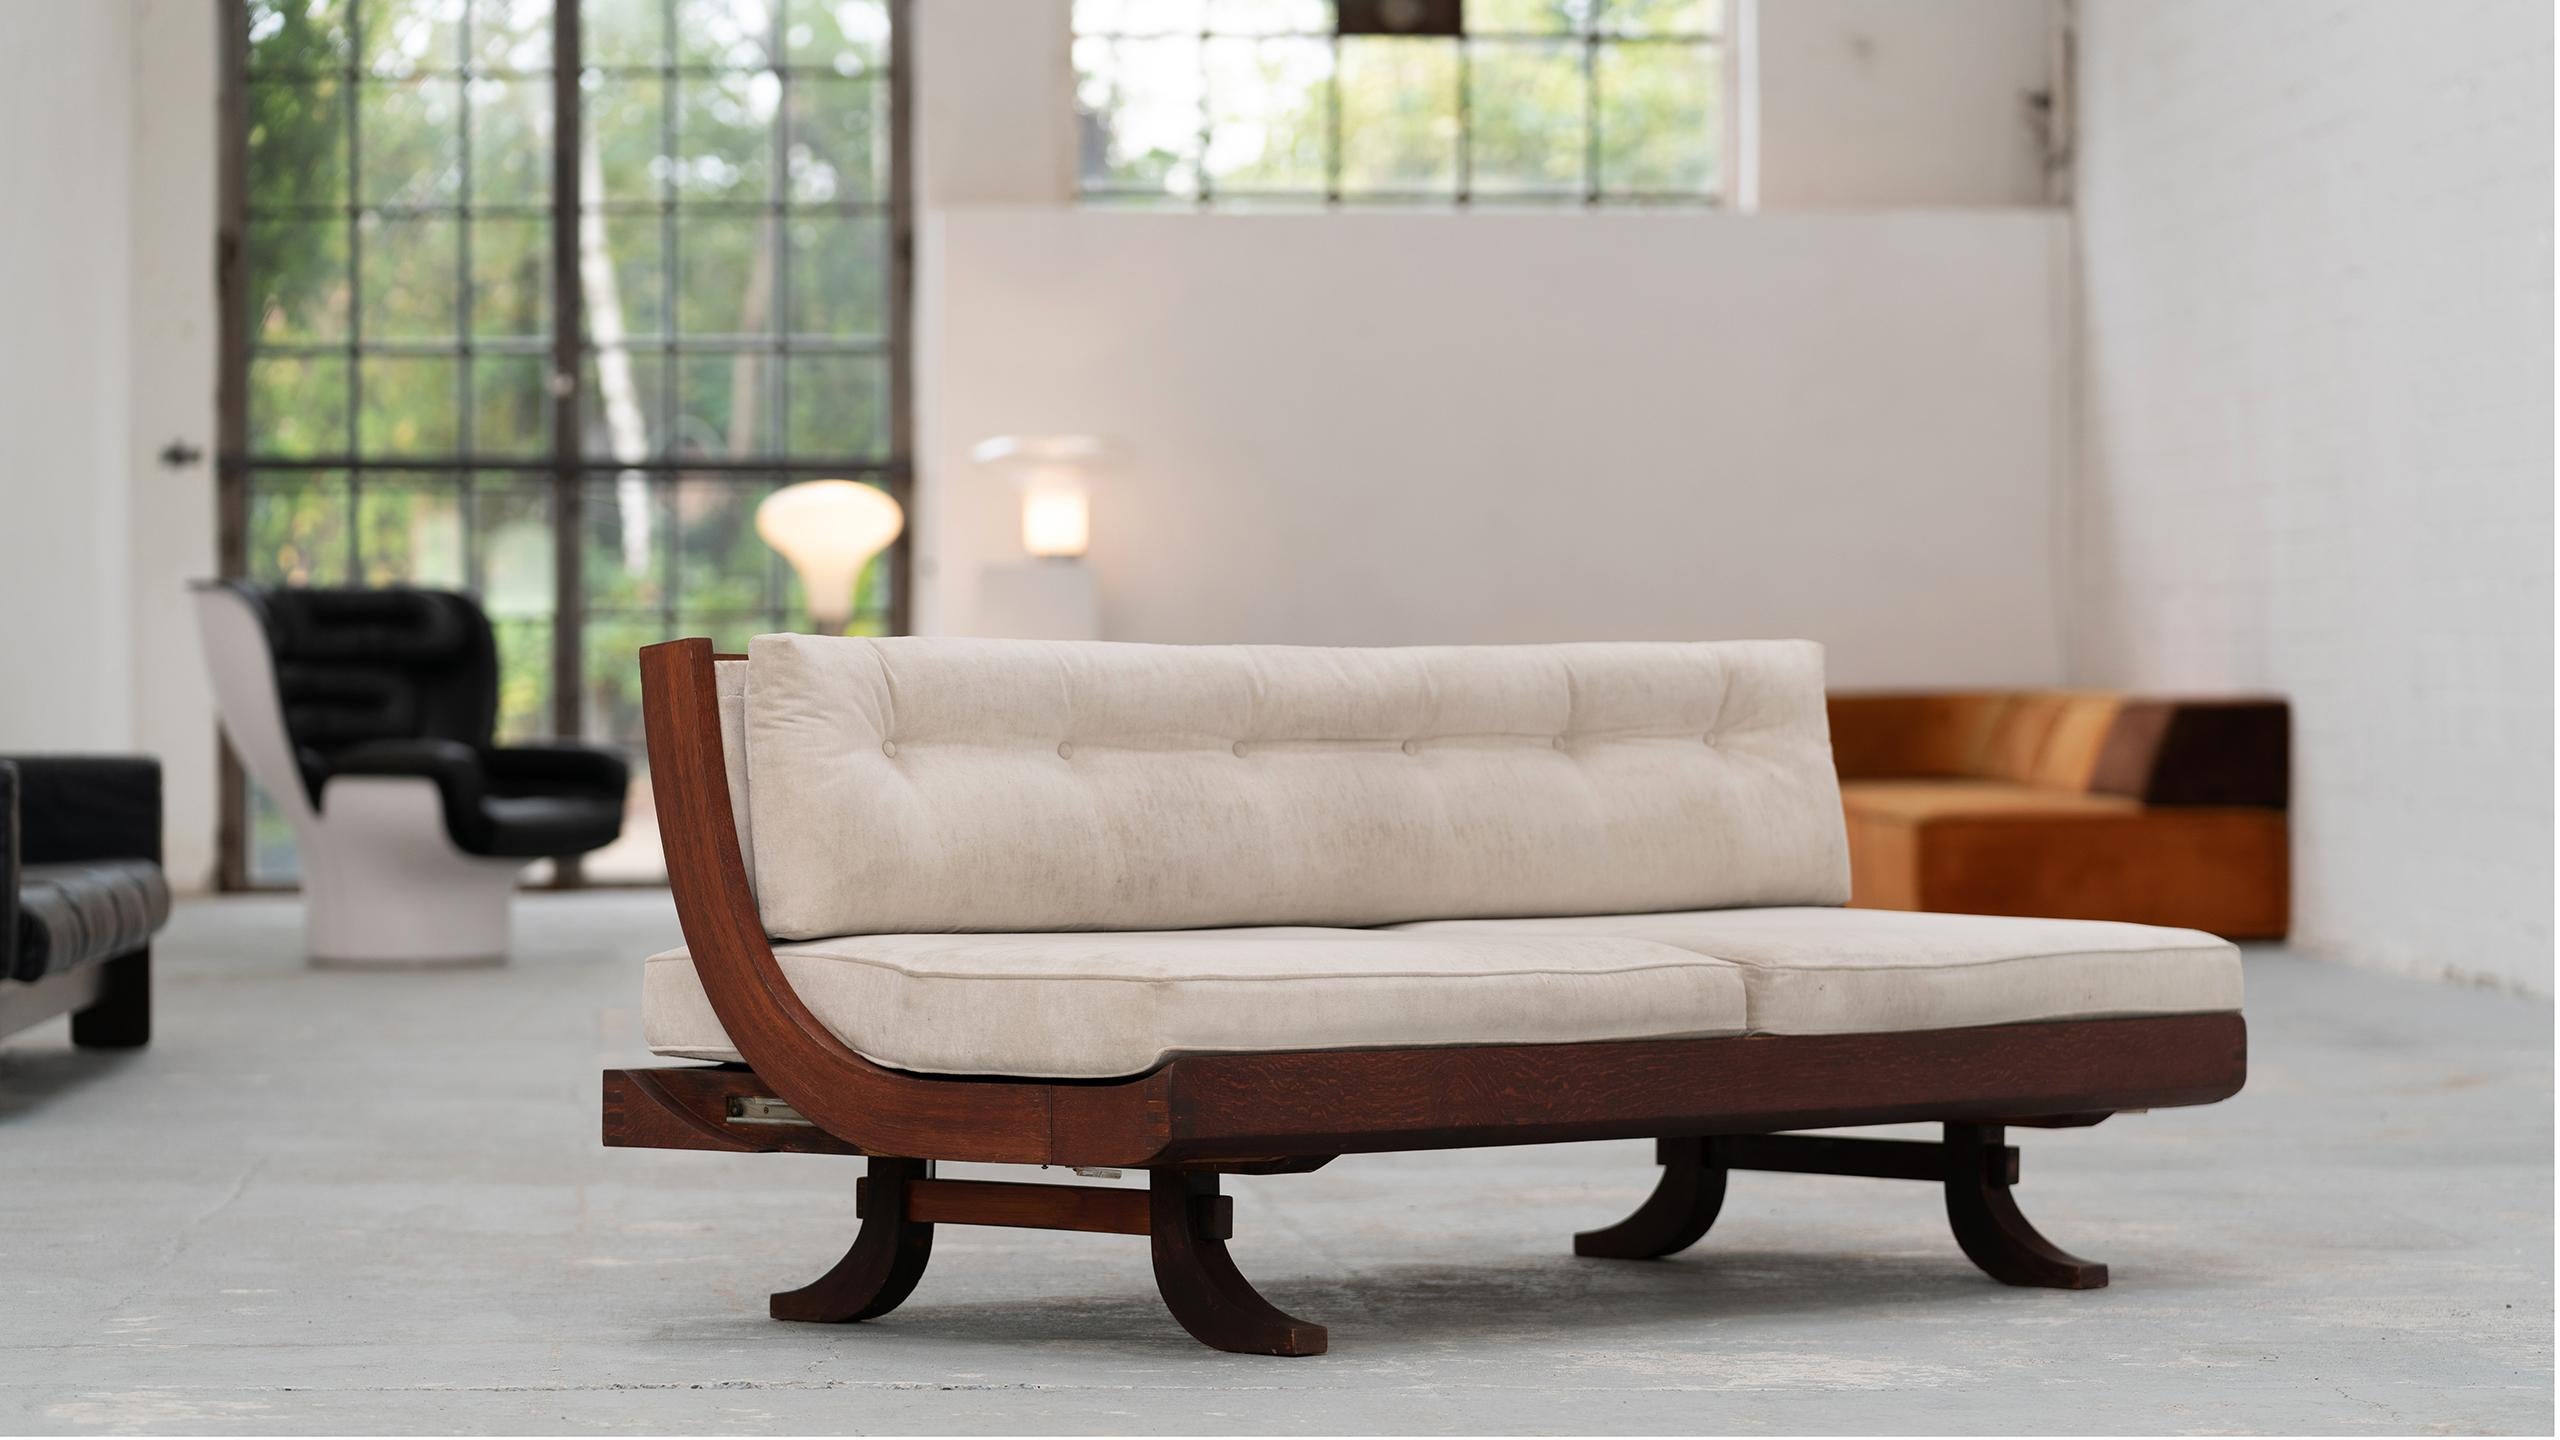 Brazilian Daybed & Sofa, 1966, Sophisticated Wood Details, Lounge & Relax 7